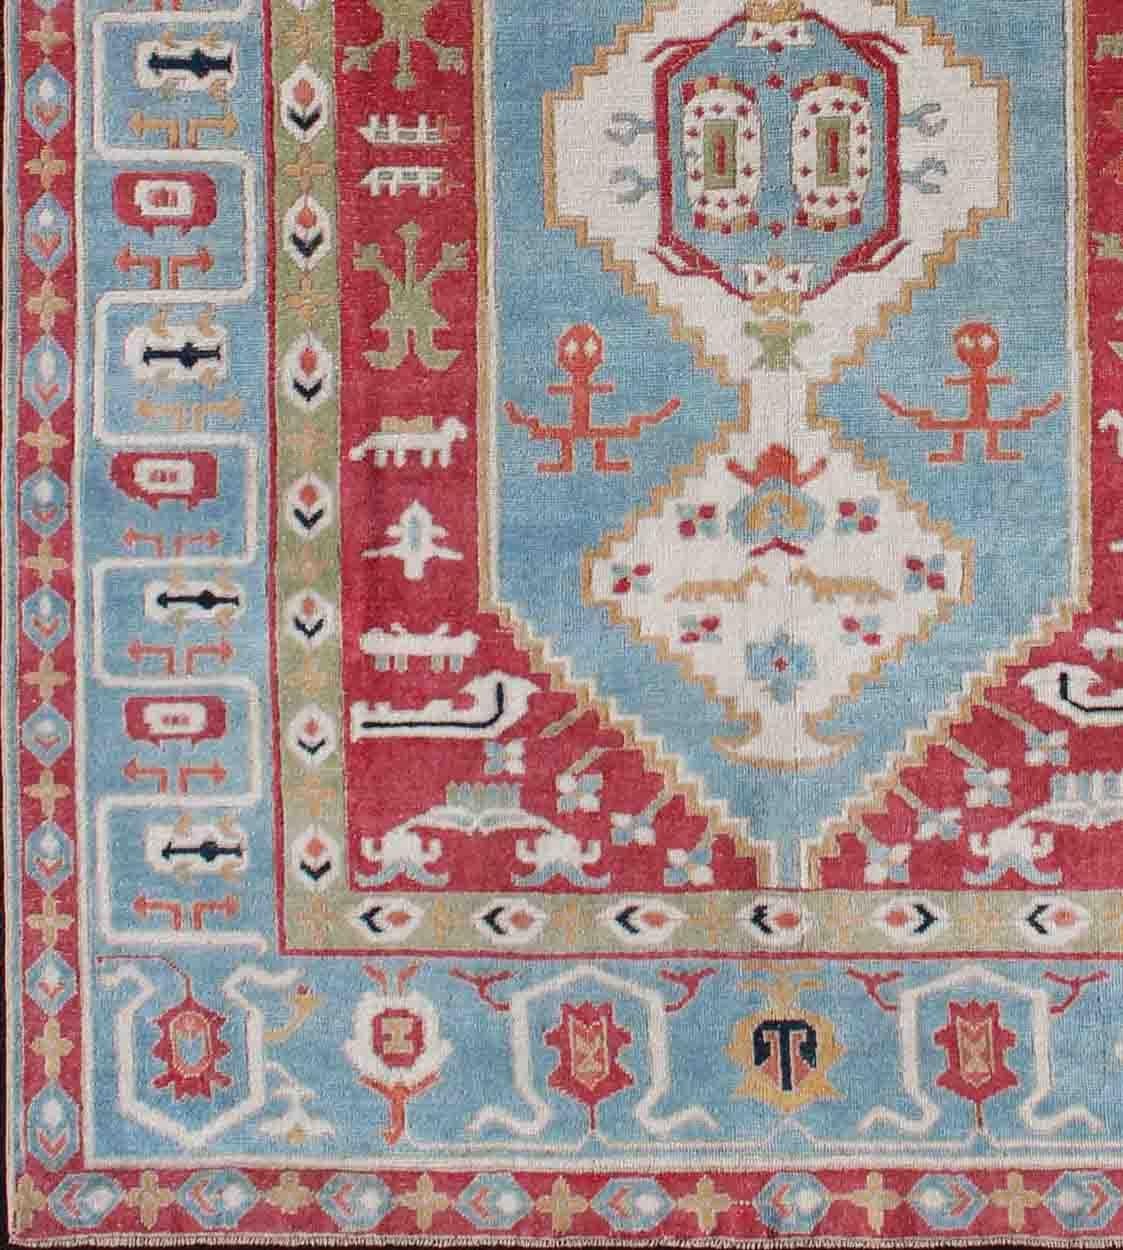 Red, aqua blue, geometric design Oushak rug from Turkey, rug en-179685, country of origin / type: Turkey / Oushak, circa 1950

This vintage Turkish Oushak rug presents a unique and vibrant composition. An array of diamond motifs fills the center